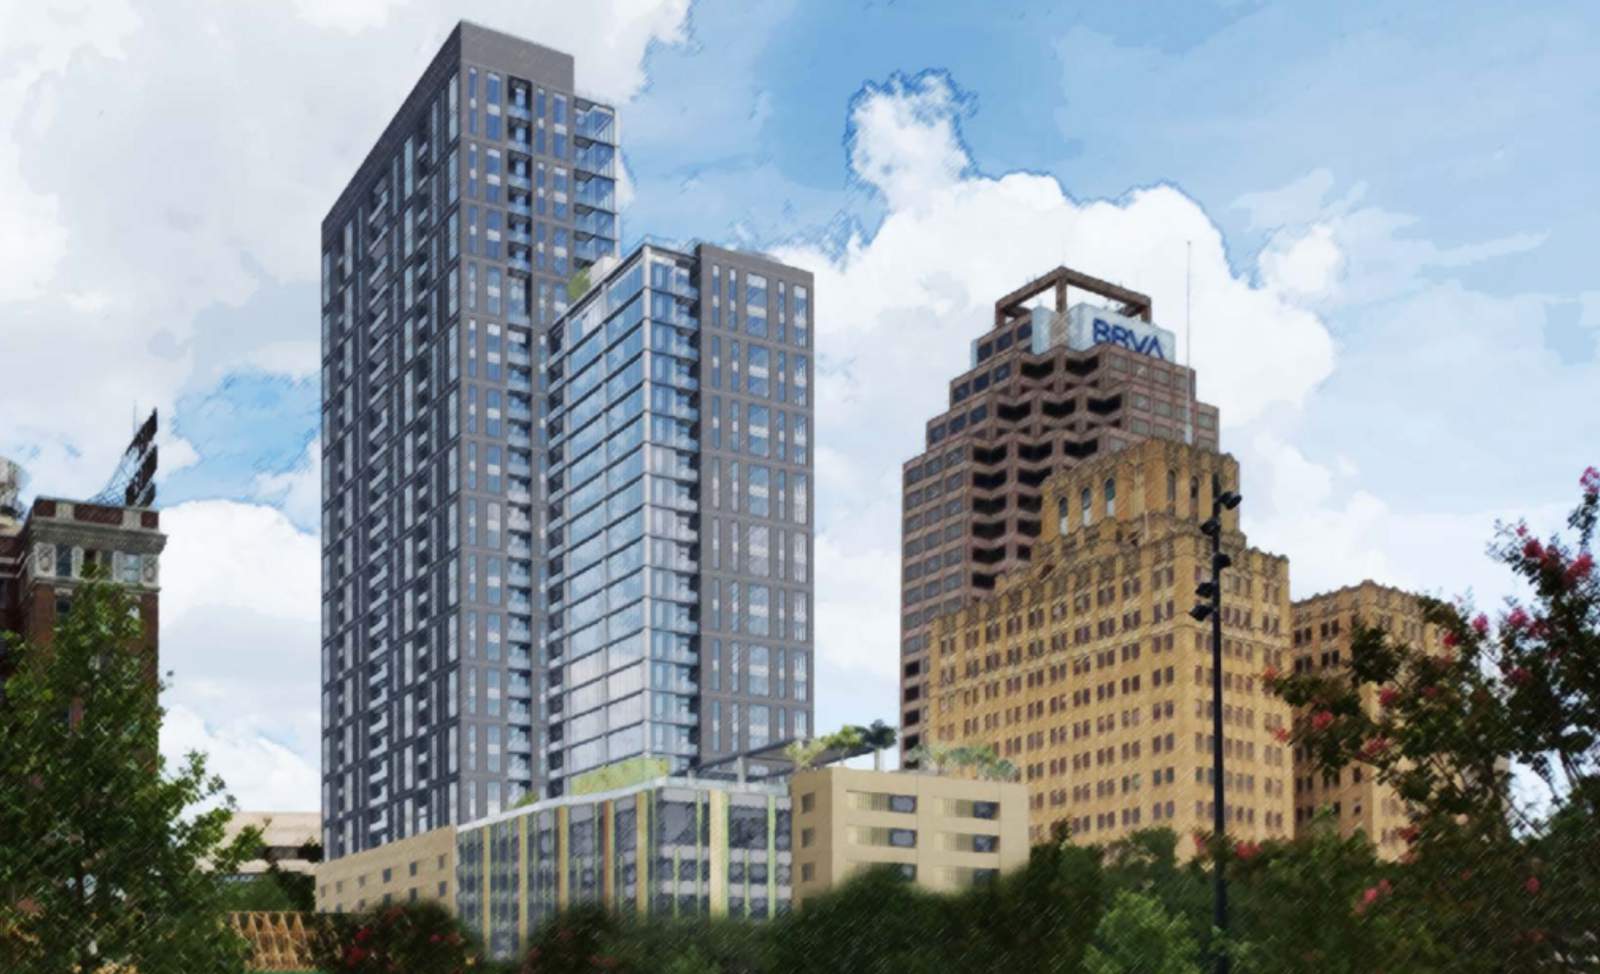 How Weston Urban’s 32-story tower could look in the San Antonio skyline